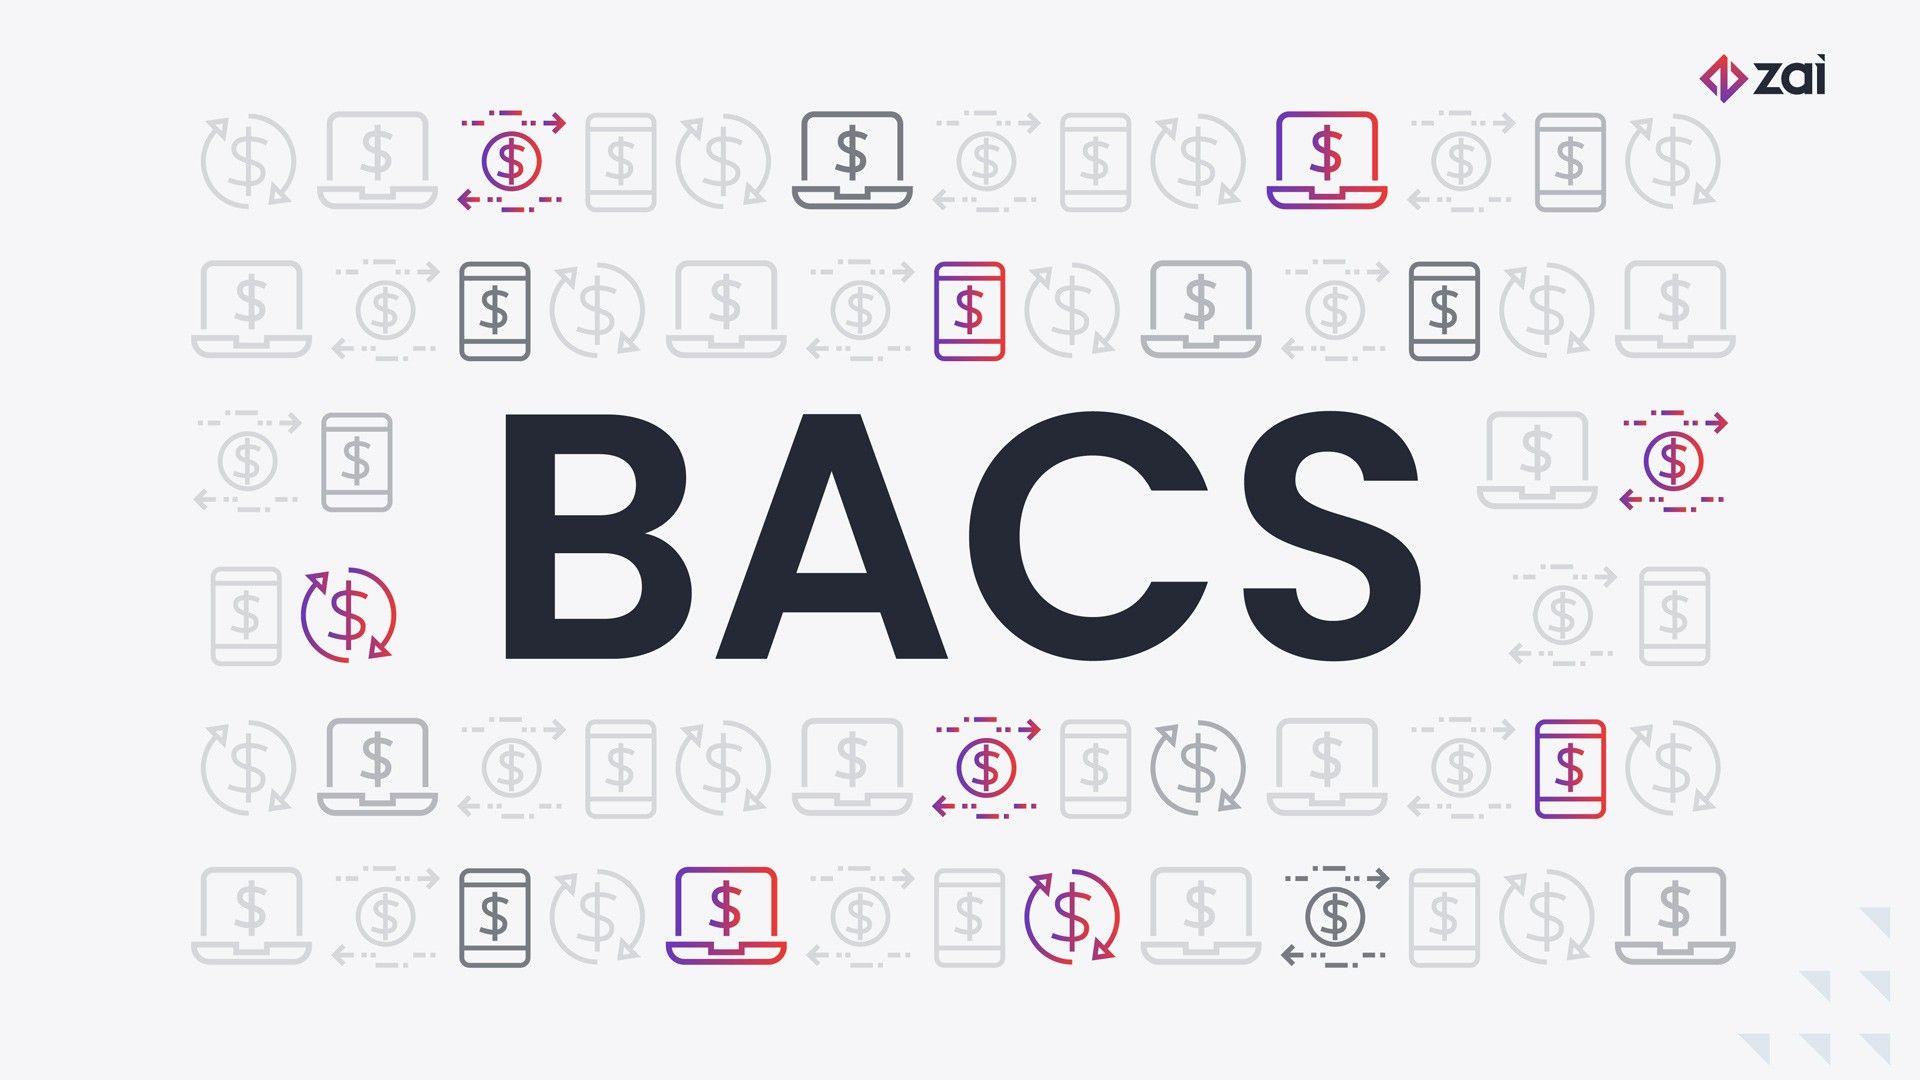 The-Bacs-payment-system